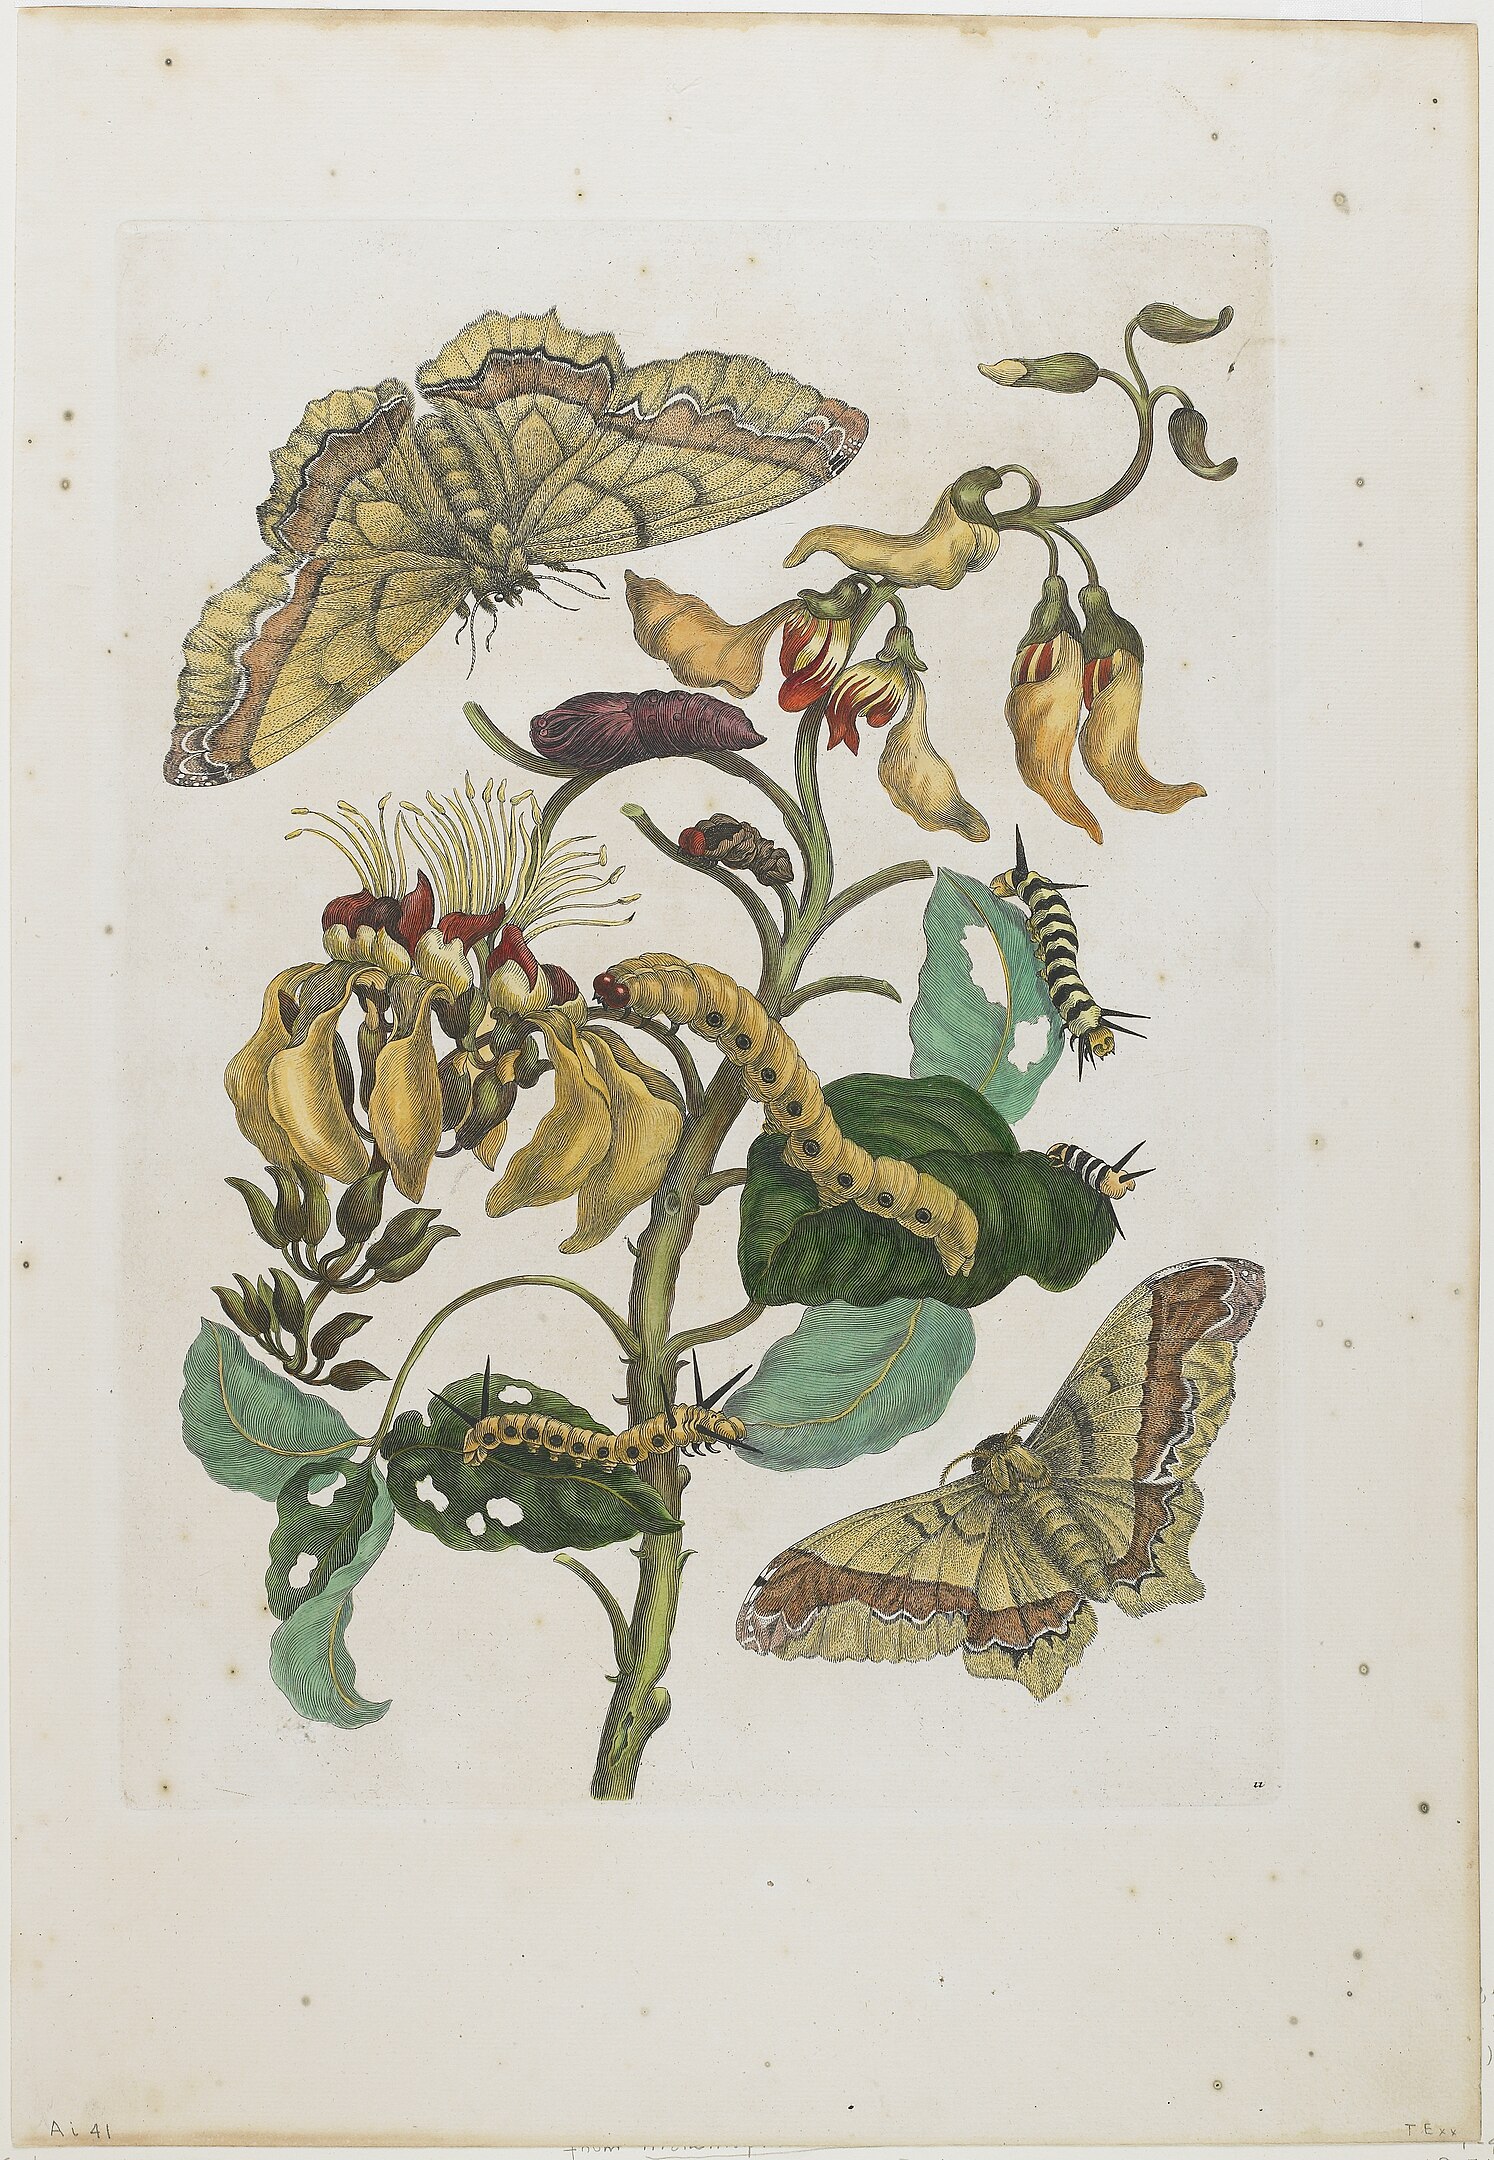 A detailed illustration of caterpillars, butterflies and flowers